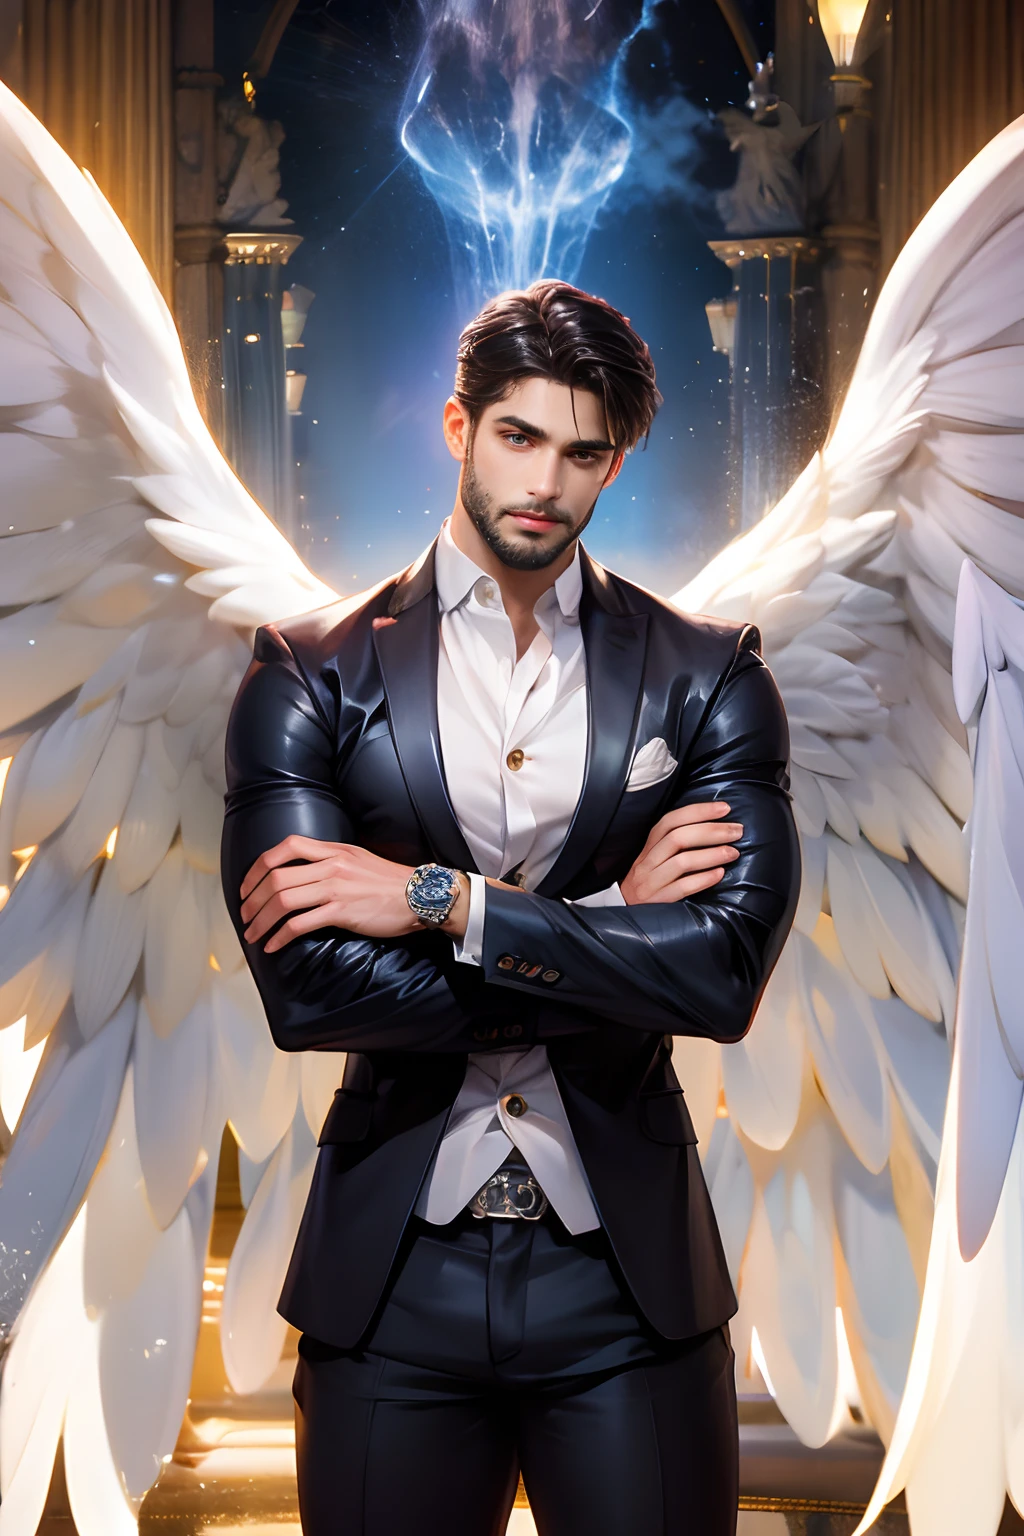 1 man, alone, young handsome man, Latin mulatto skin, attractive features, tan tone skin, dark blue eyes, friendly expression, huge white wings coming out of his back, 2 angel wings, physical fitness, man's long haircut medium, black brown hairstyle, small beard, casual clothing, urban outfit, red suit, full body tattoos. emotion: greet, environment: war field